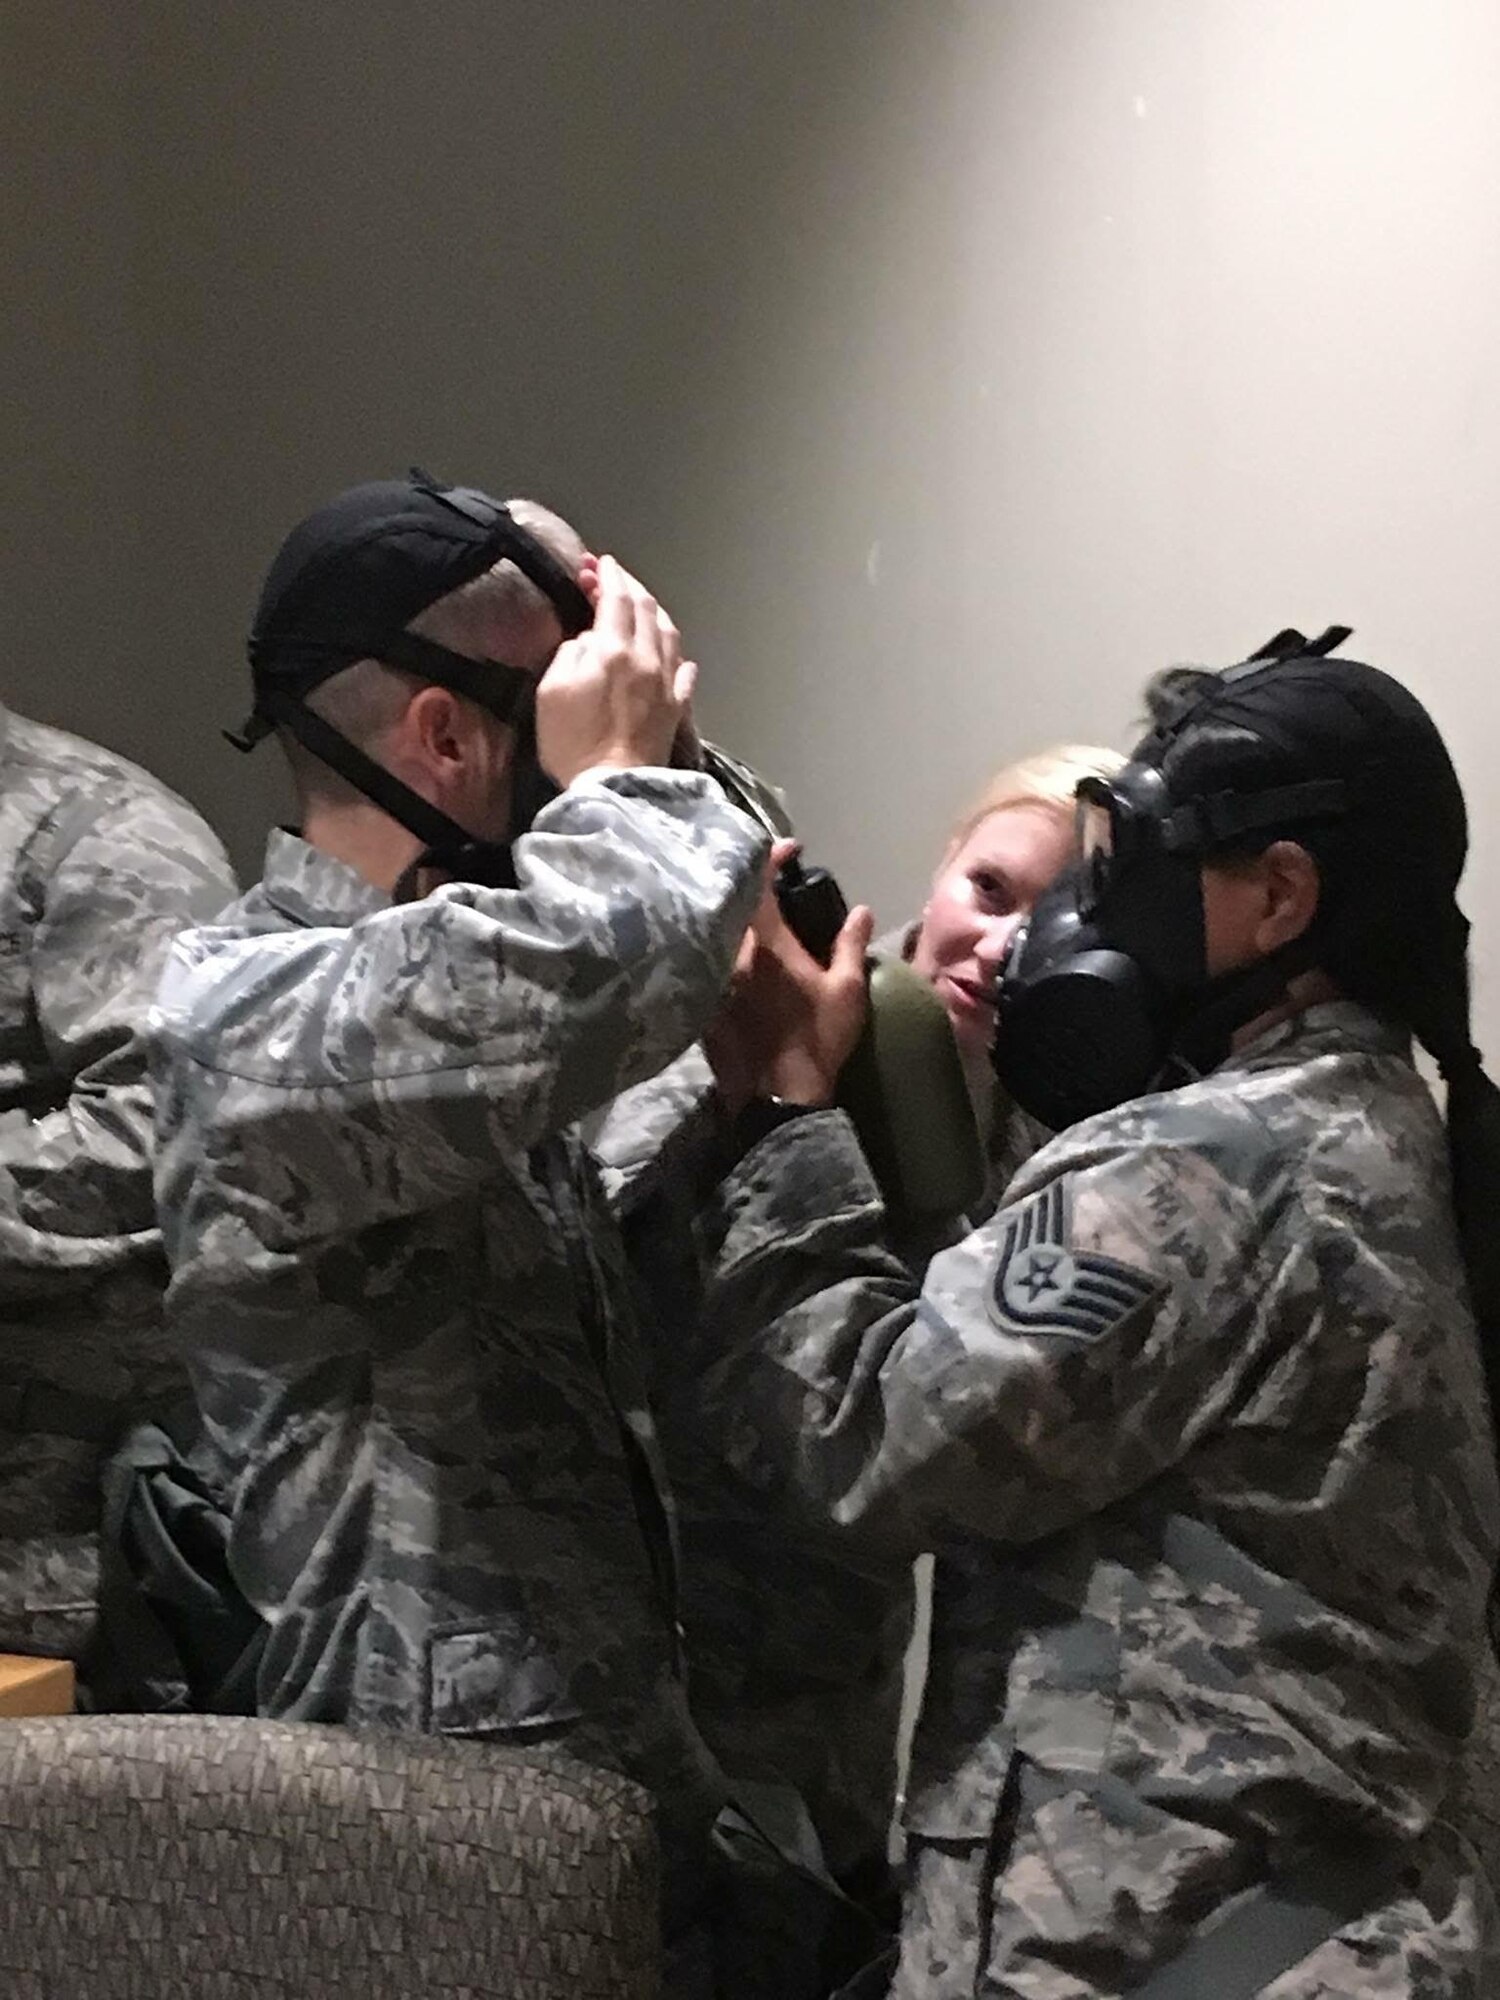 Members of the 507th Air Refueling Wing practice gas mask procedures during CBRN training Aug. 6, 2017 at Tinker Air Force Base, Okla. (U.S. Air Force photo/Tech. Sgt. Samantha Mathison)